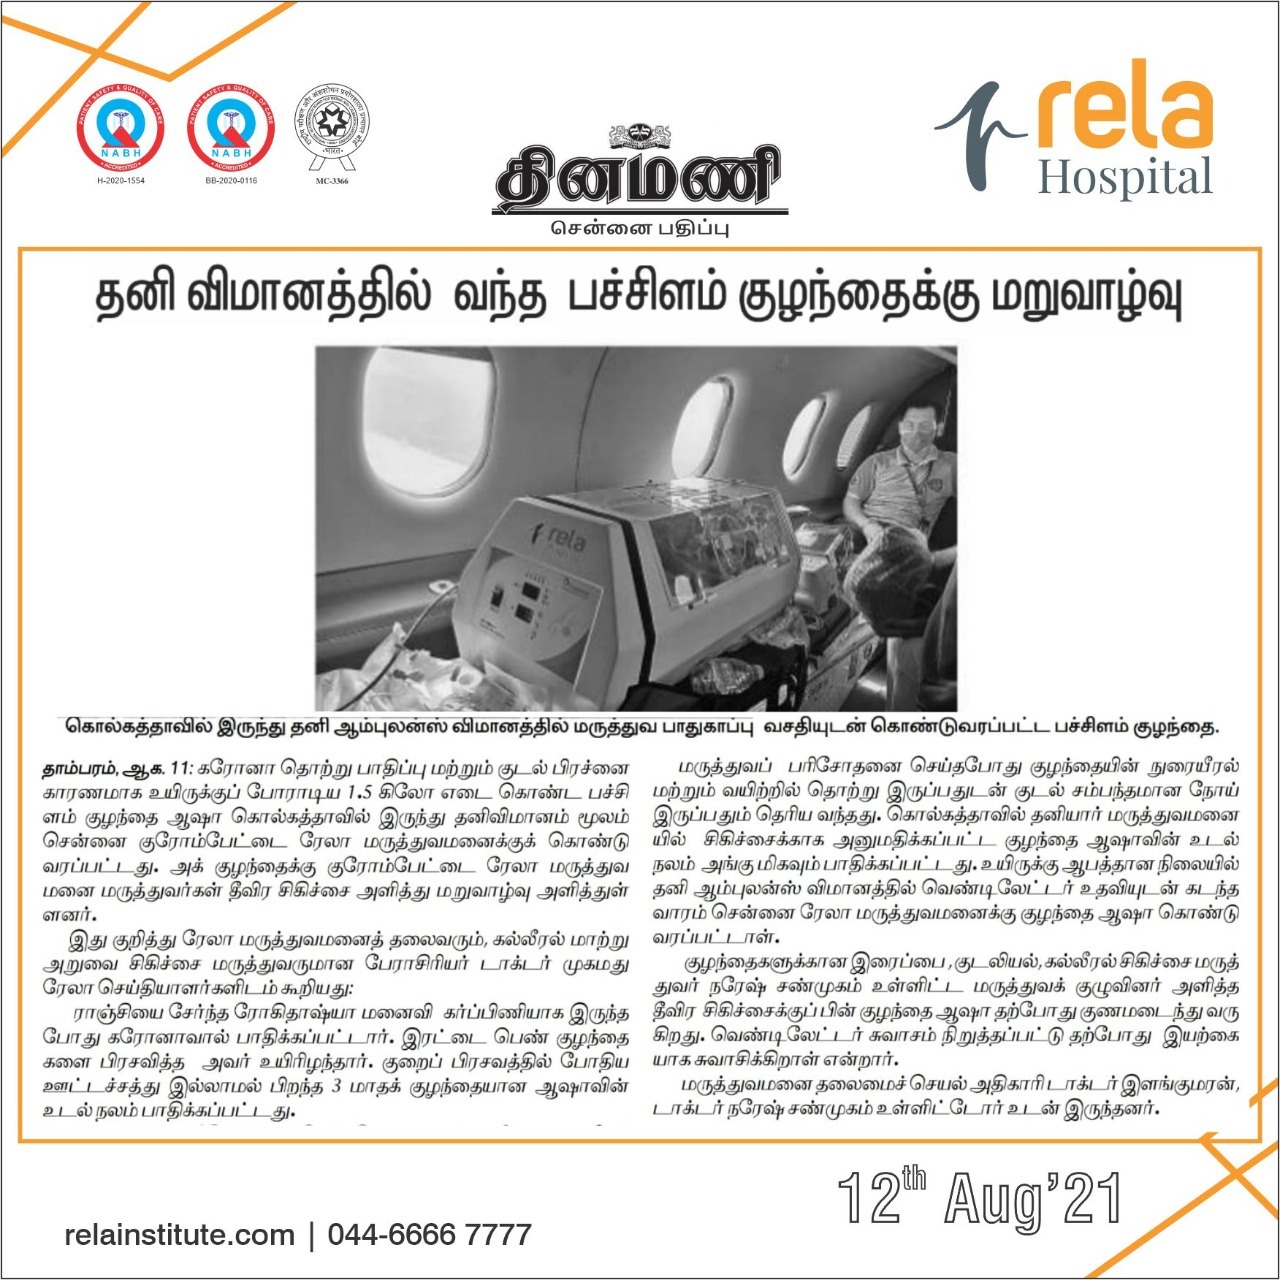 Preterm And Underweight Baby With Post Covid Complications And Abdominal Failure, Airlifted To Chennai